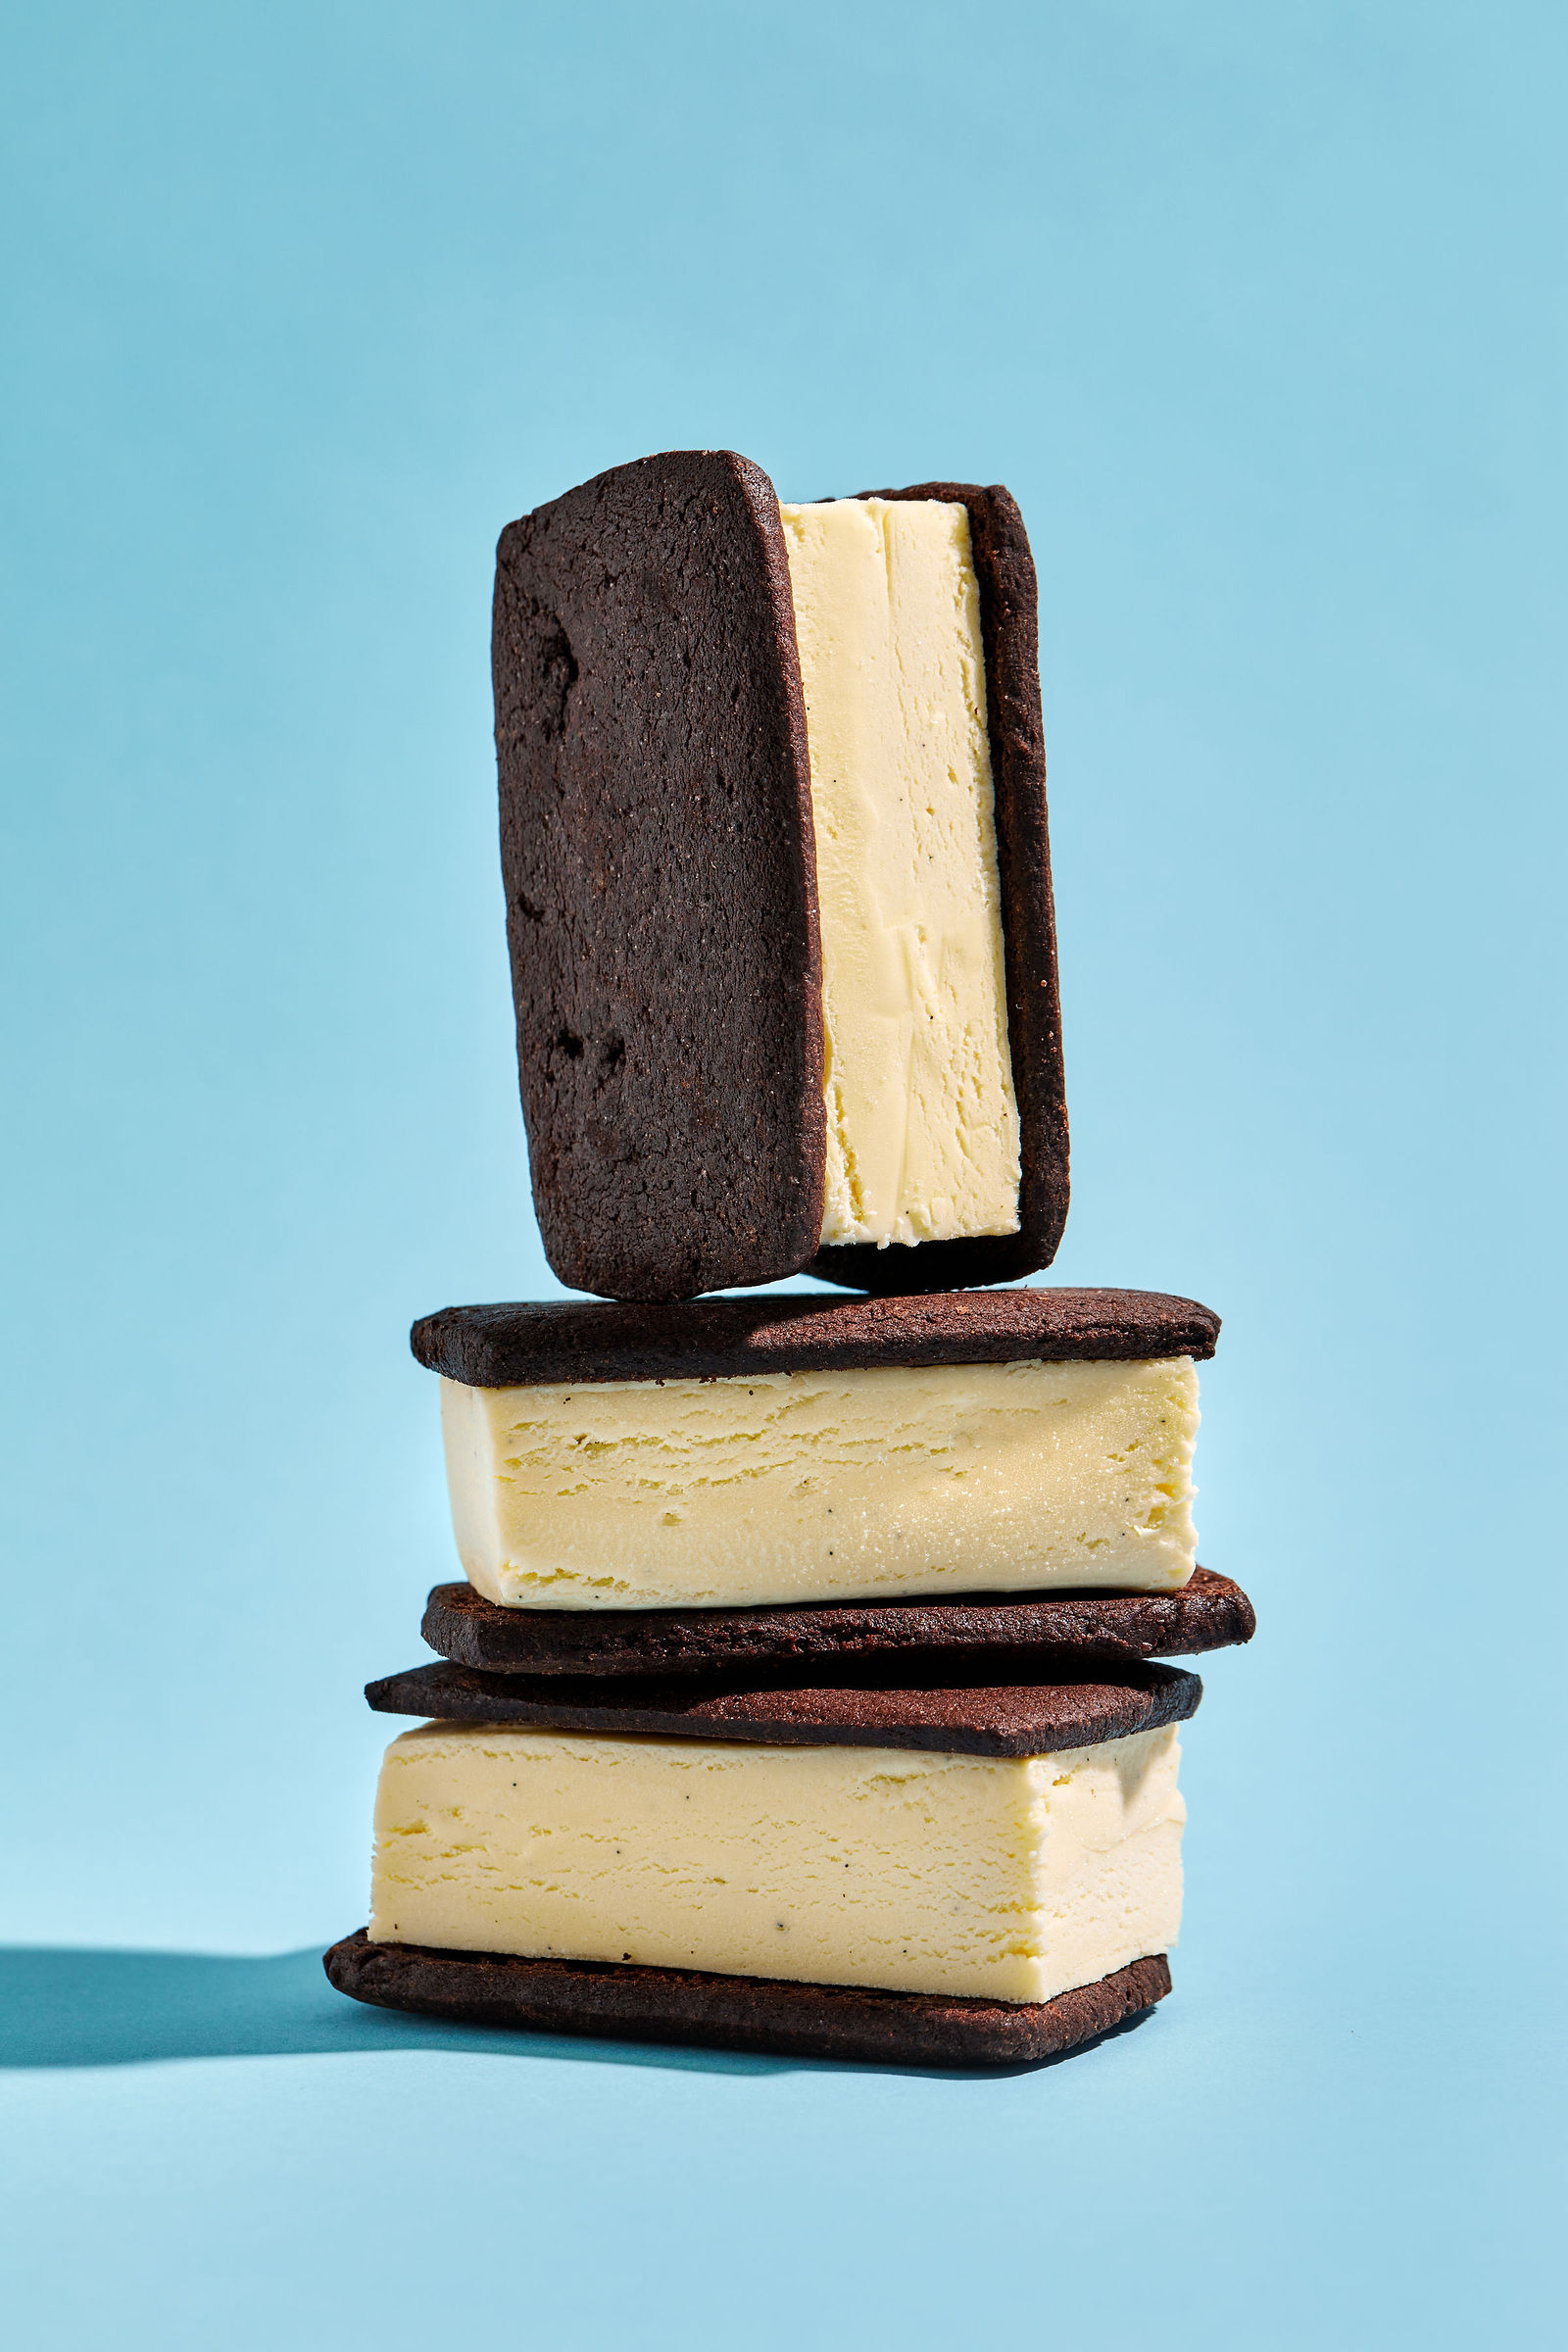 three vanilla ice cream sandwiches stacked on top of one another